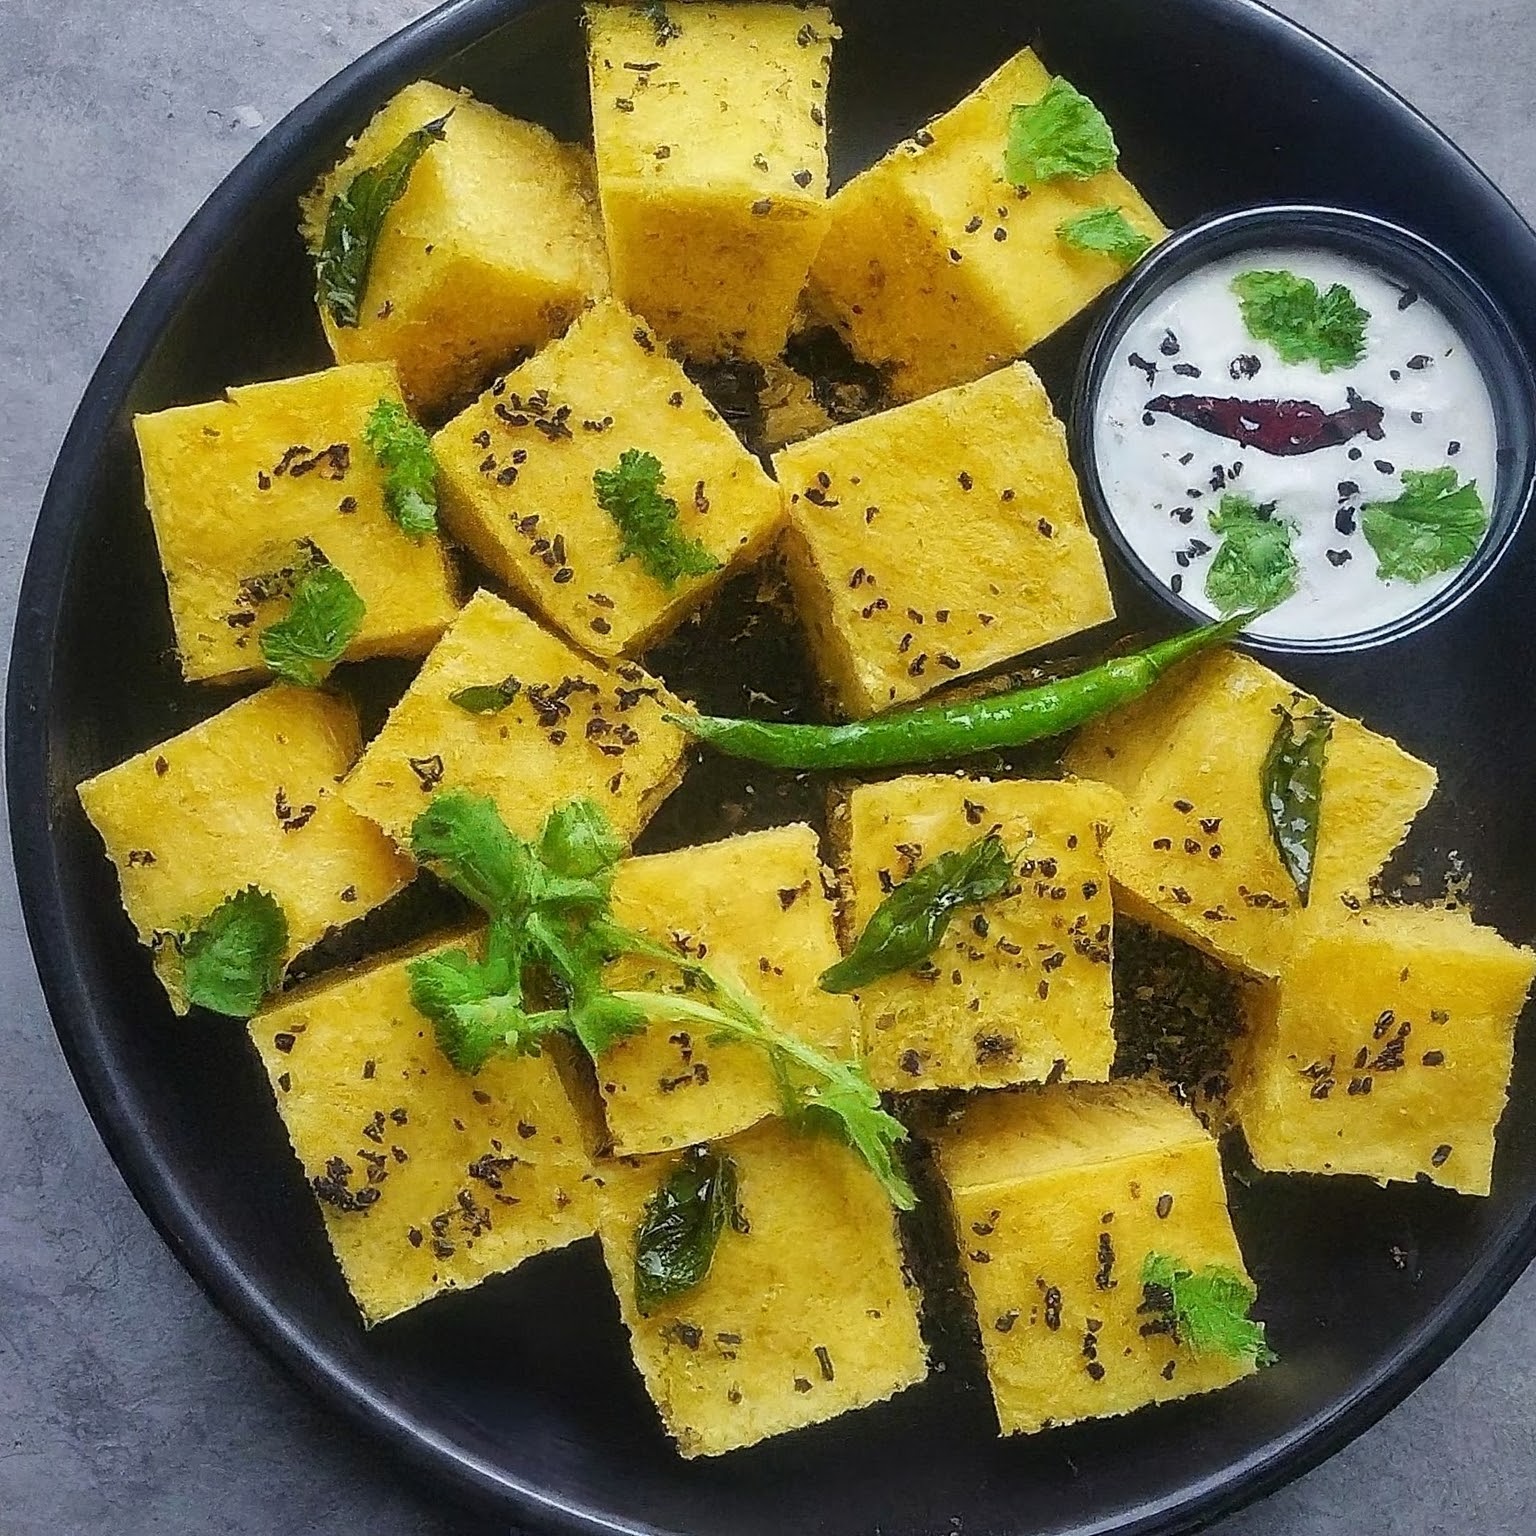 Dhokla, a steamed savoury cake made with a fermented batter of lentils and rice.